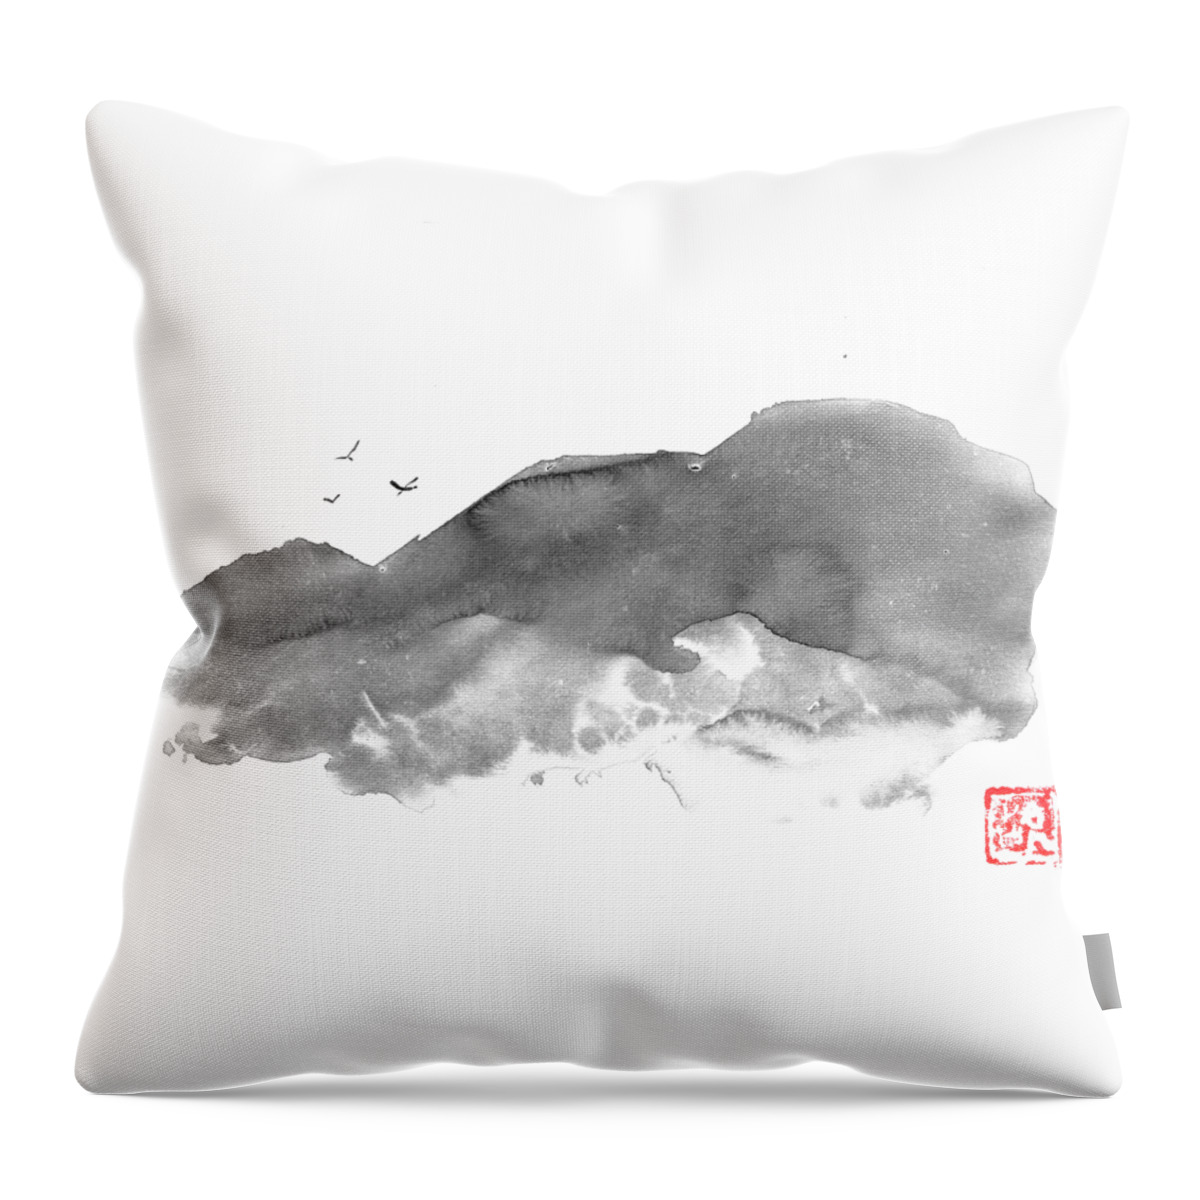 Mountain Throw Pillow featuring the drawing Bird Of The Mountain by Pechane Sumie